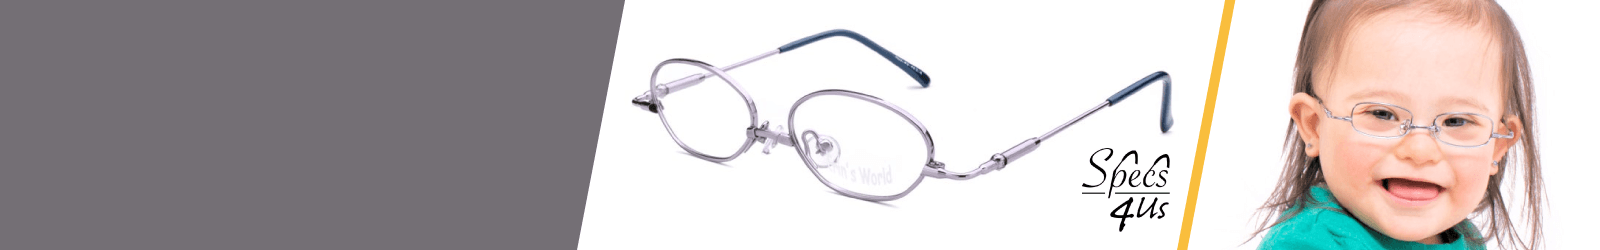 White Specs4us Eyewear for Kids from 8 to 10-year-old